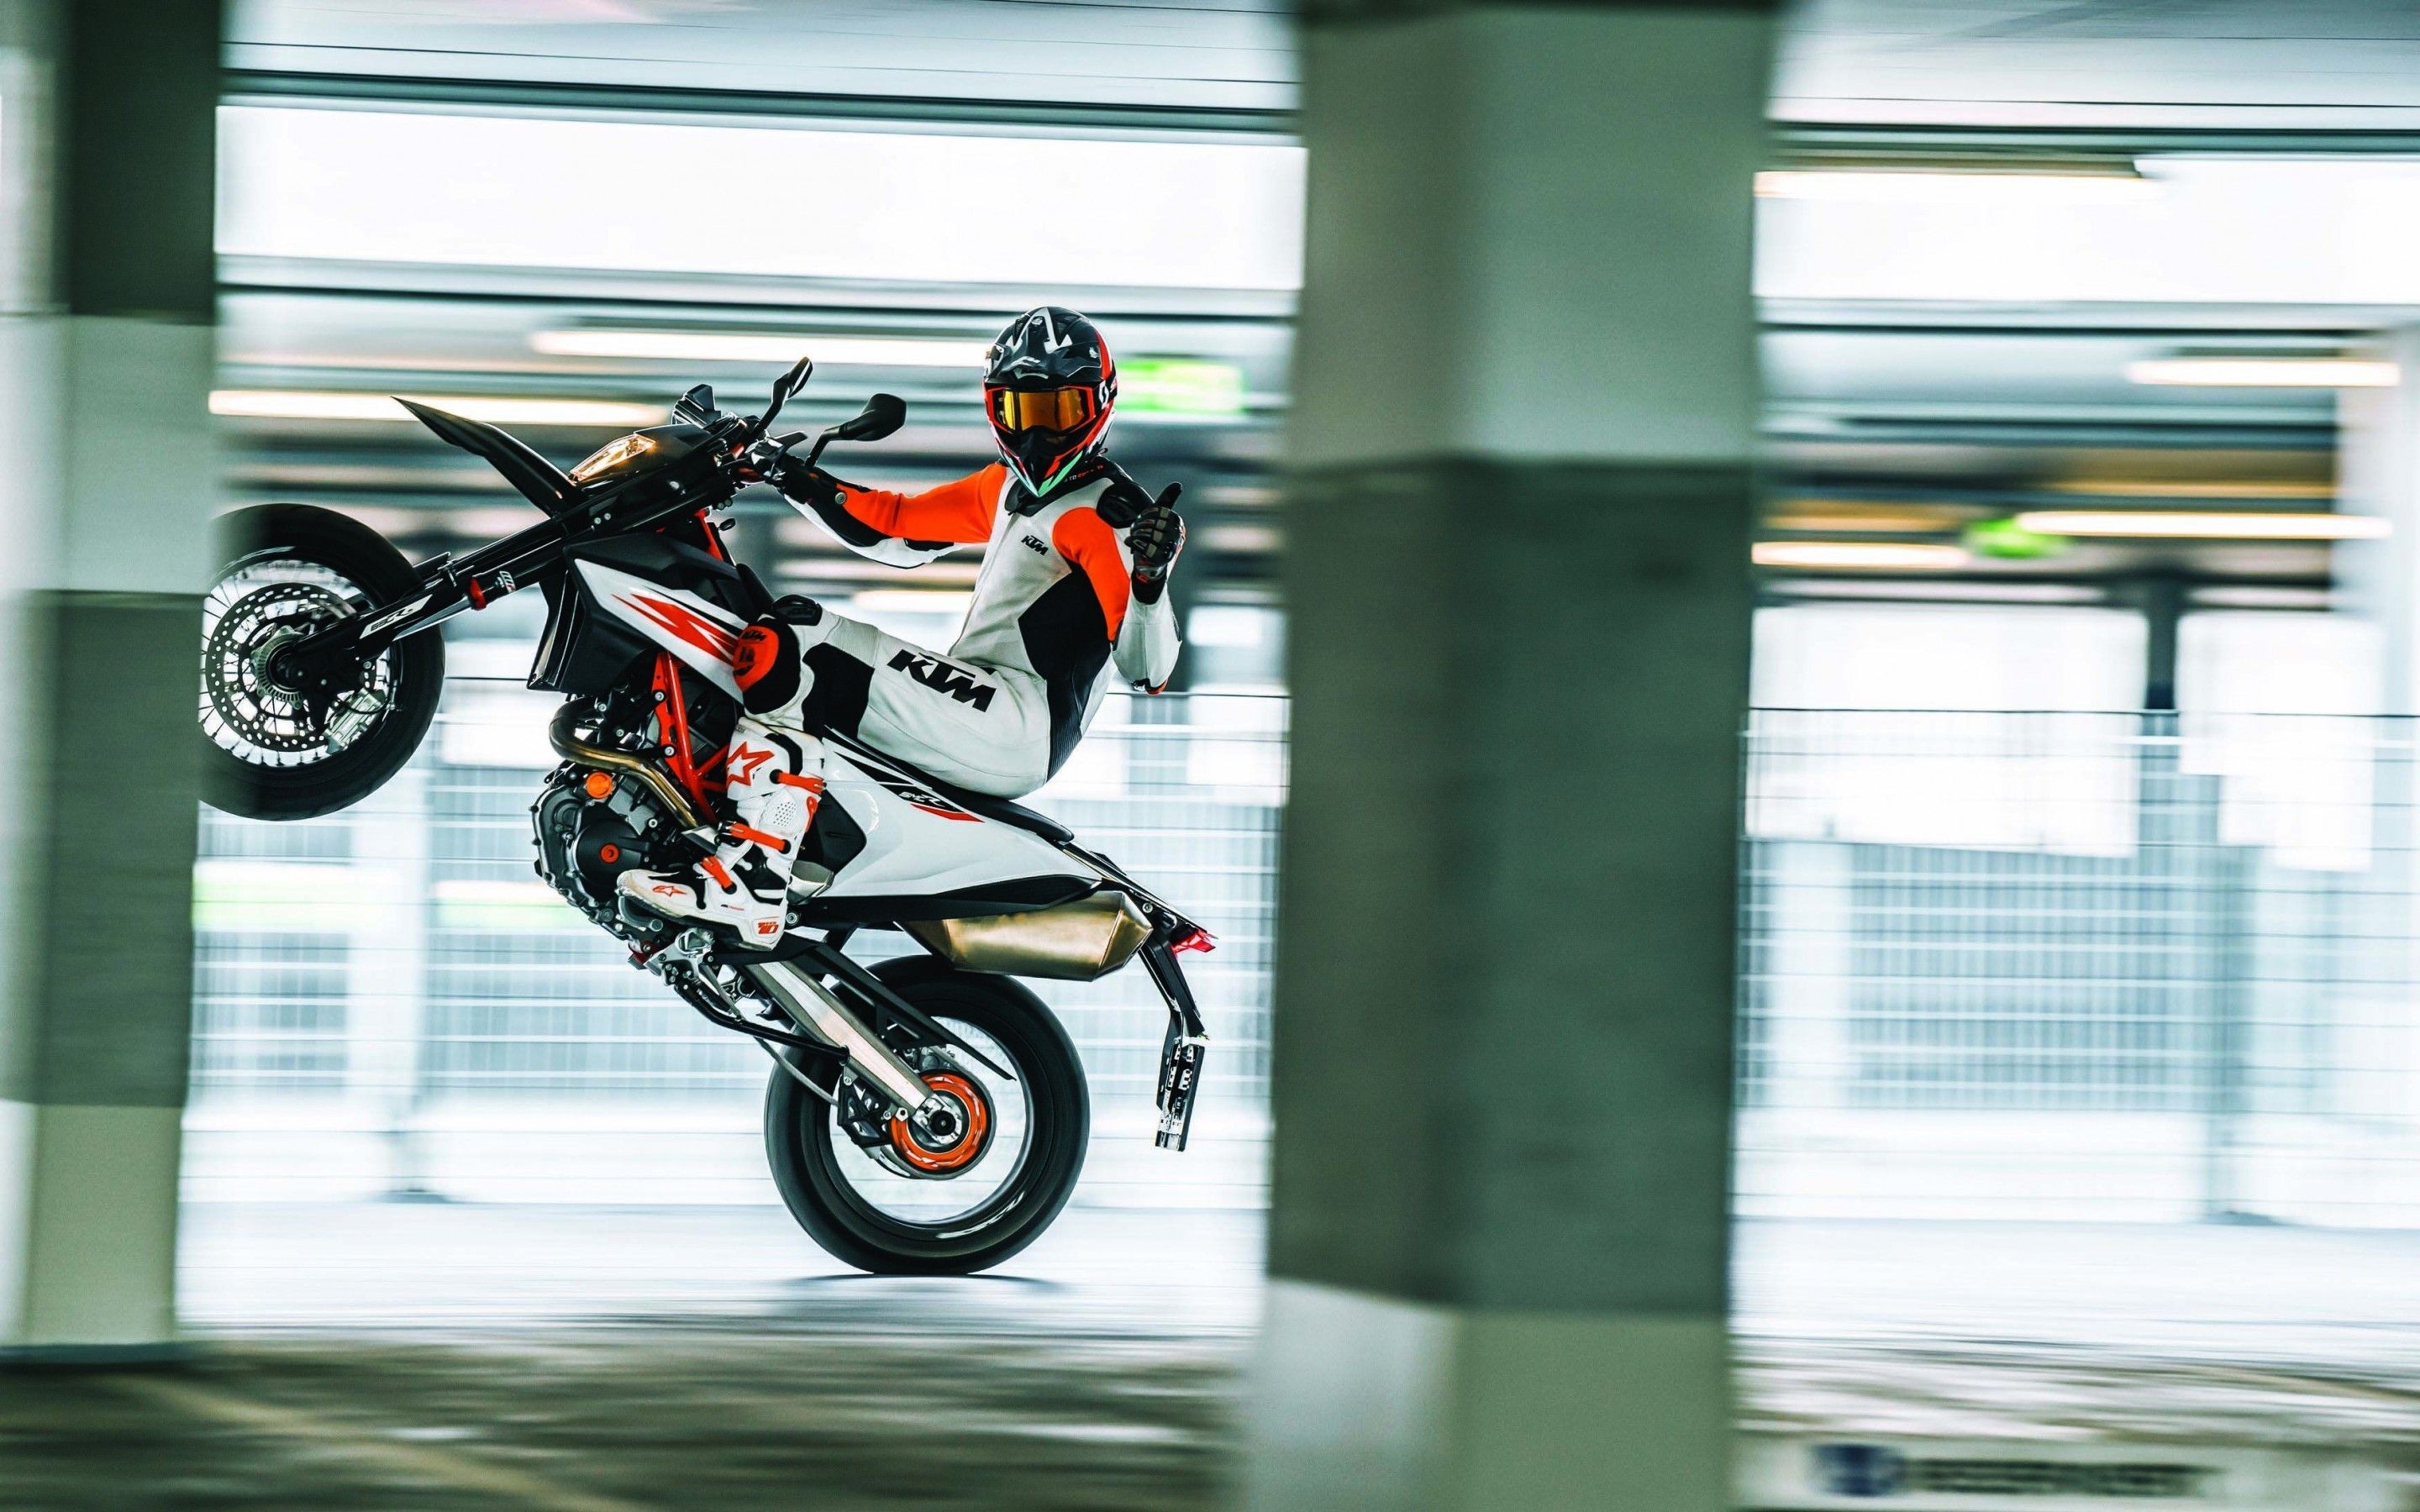 Download 2880x1800 Ktm 690 Smc R, Motorcycle, Thumbs Up, Supermoto